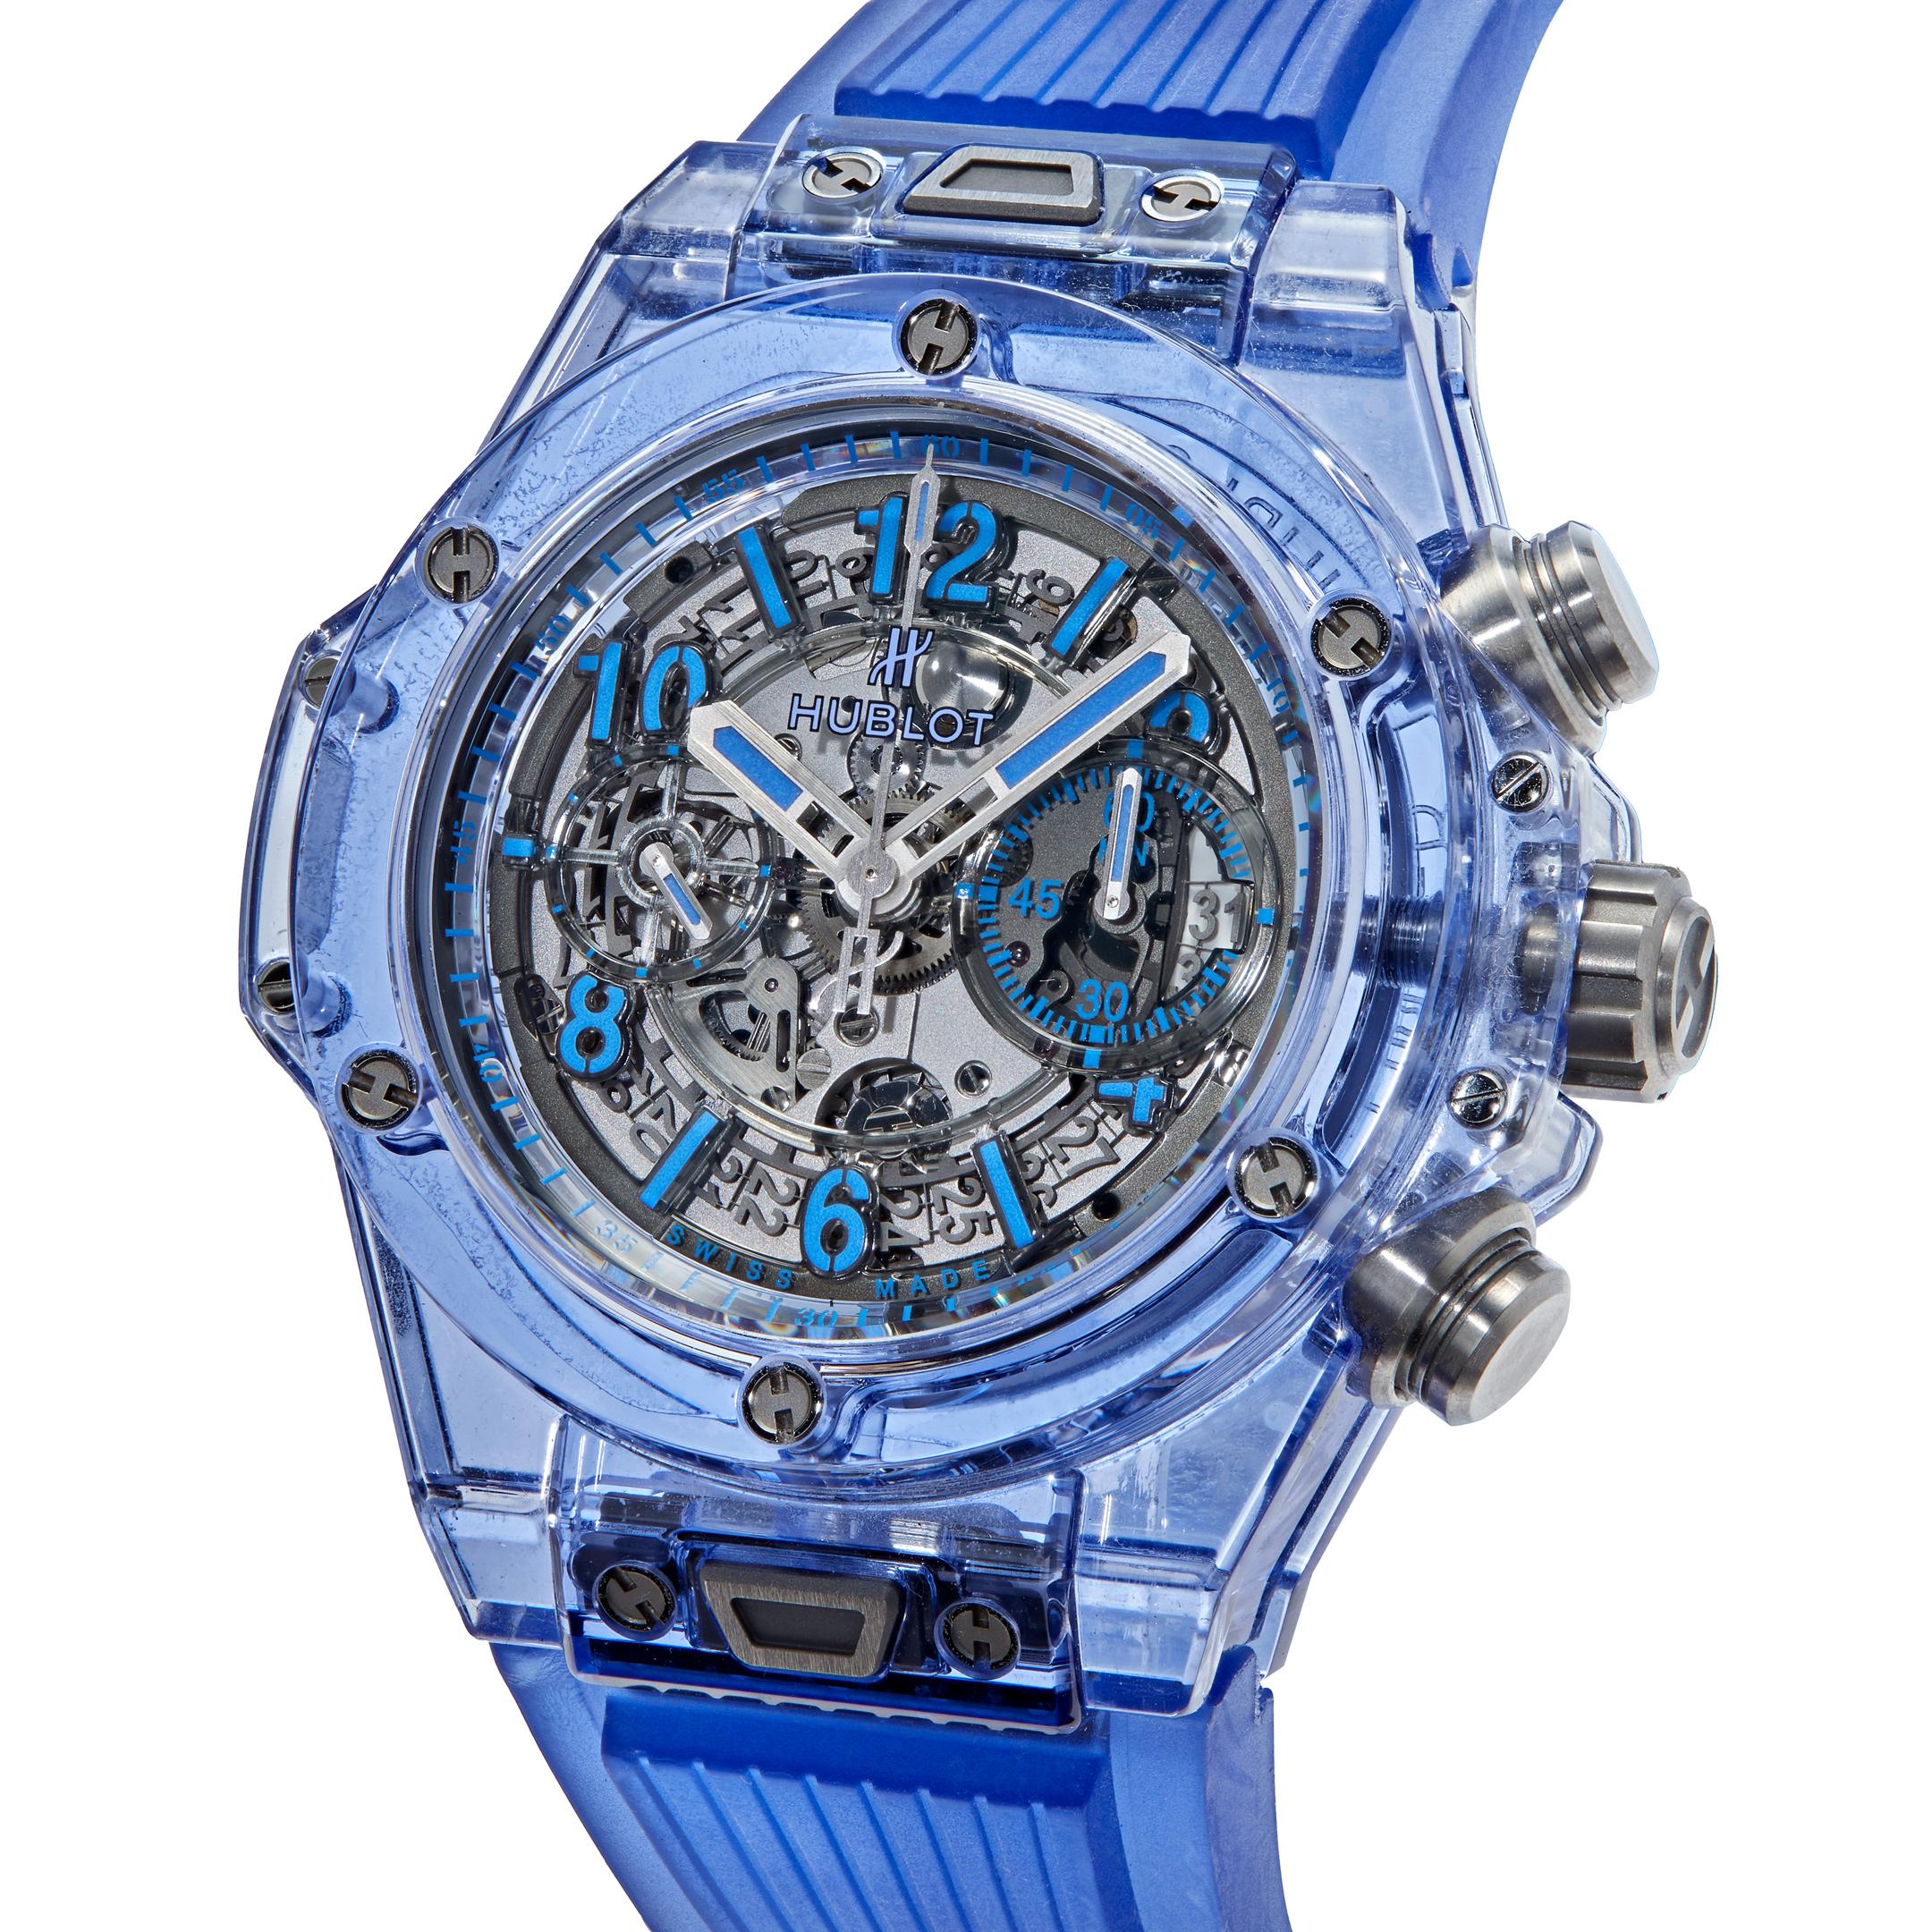 Introducing the Hublot Big Bang Unico Blue Sapphire 411.JL.4809.RT; This unique timepiece features a clear blue rubber strap and a transparent blue sapphire crystal casing. The bezel is made of translucent blue sapphire crystal and is fixed. It